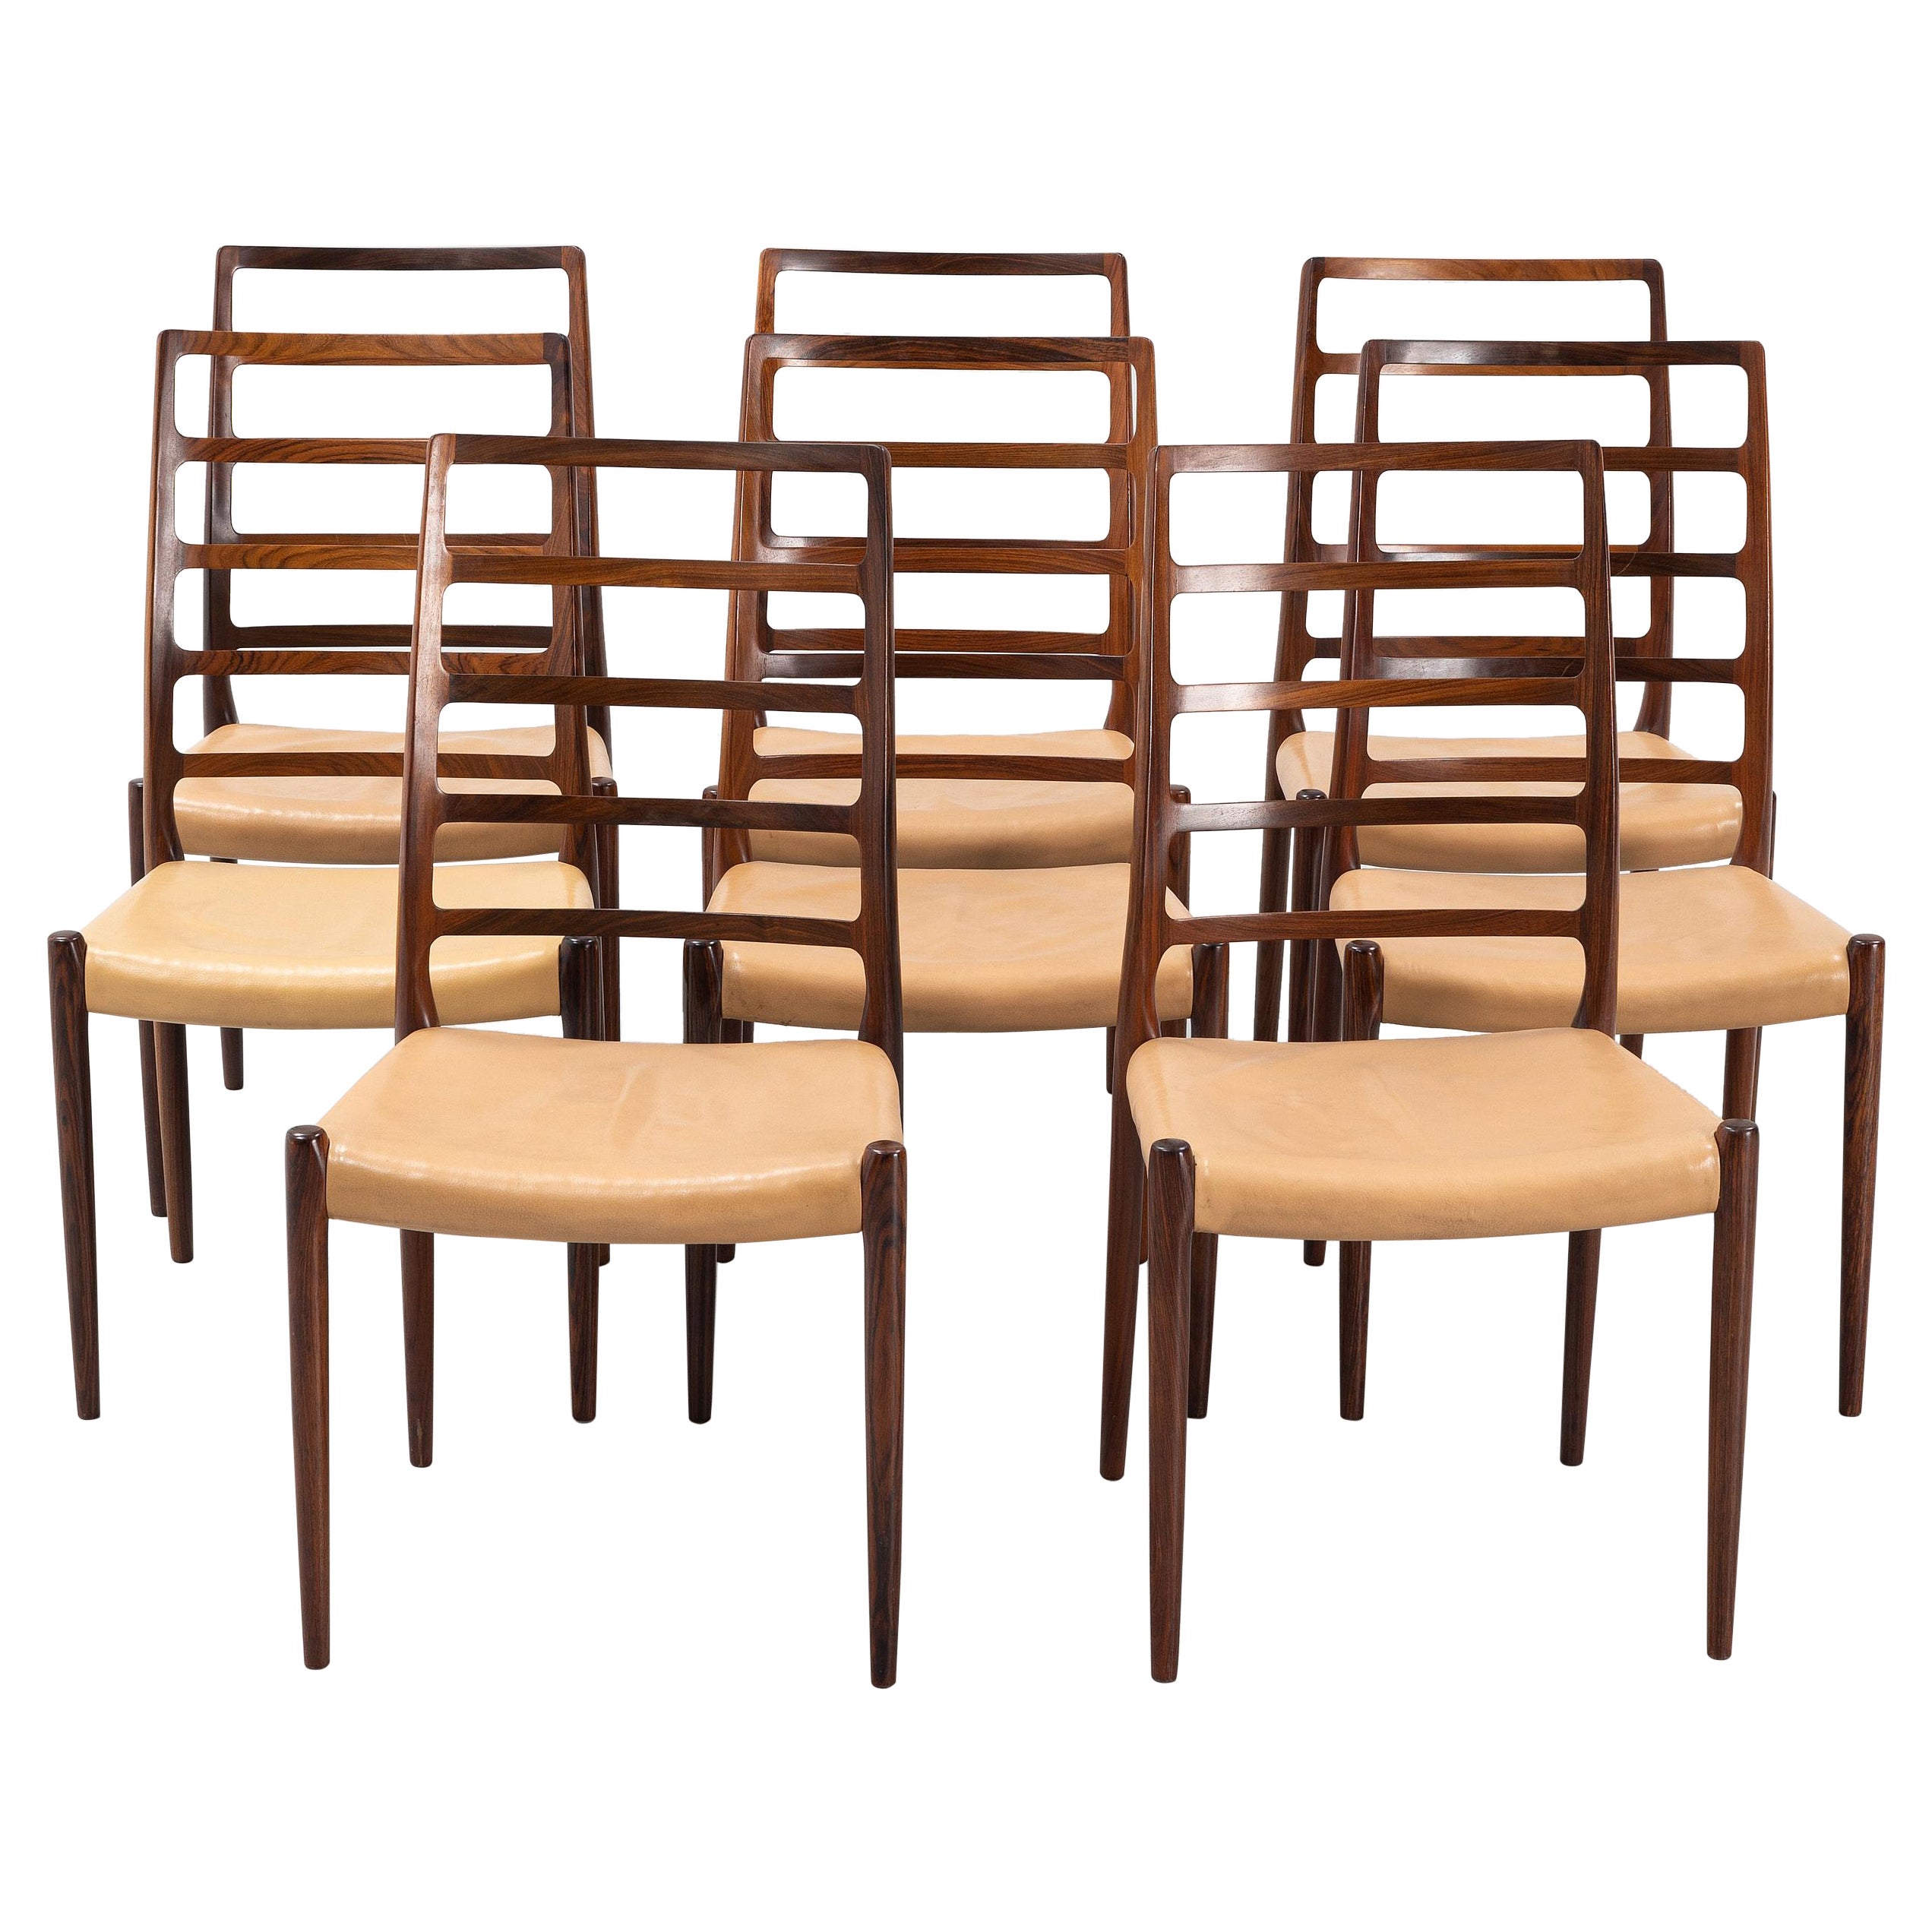 Neils Otto Moller Dining Chairs Mod 82, Set of 8 in Rosewood Denmark 1960